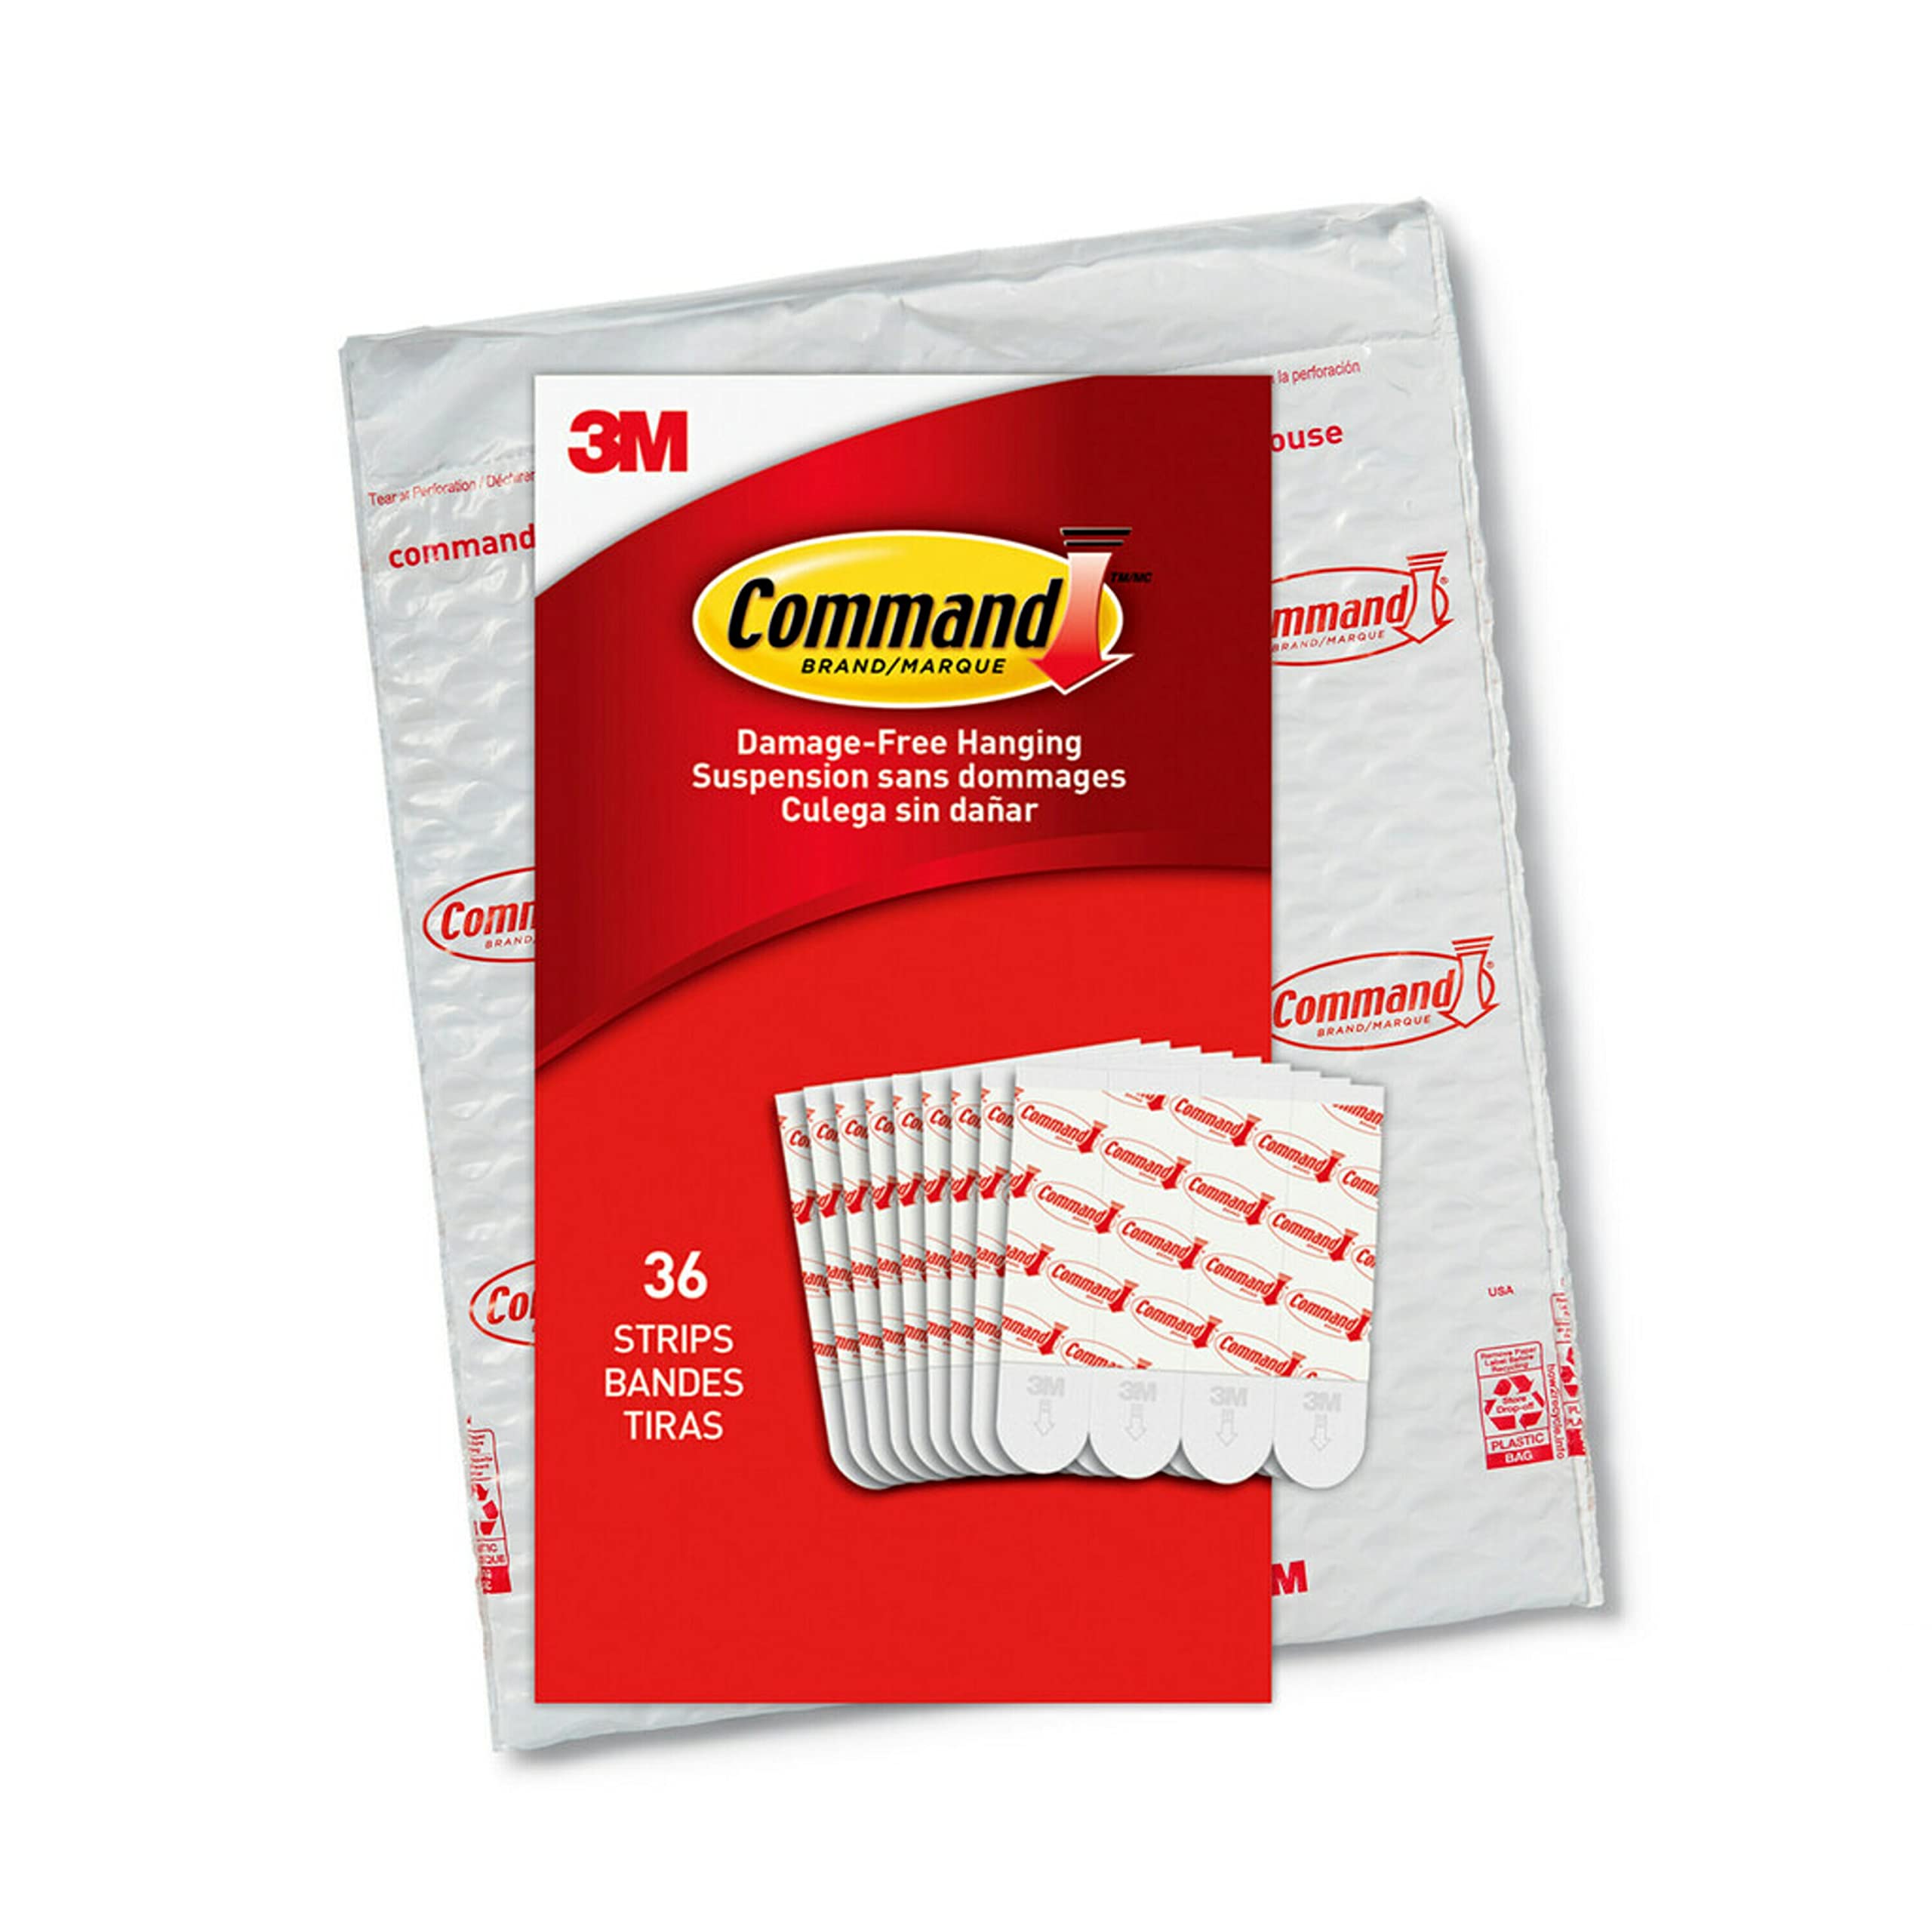 Command Medium Refill Adhesive Strips, Damage Free Hanging Adhesive Strips for Medium Indoor Wall Hooks, No Tools Removable Adhesive Strips for Living Spaces, 36 White Strips